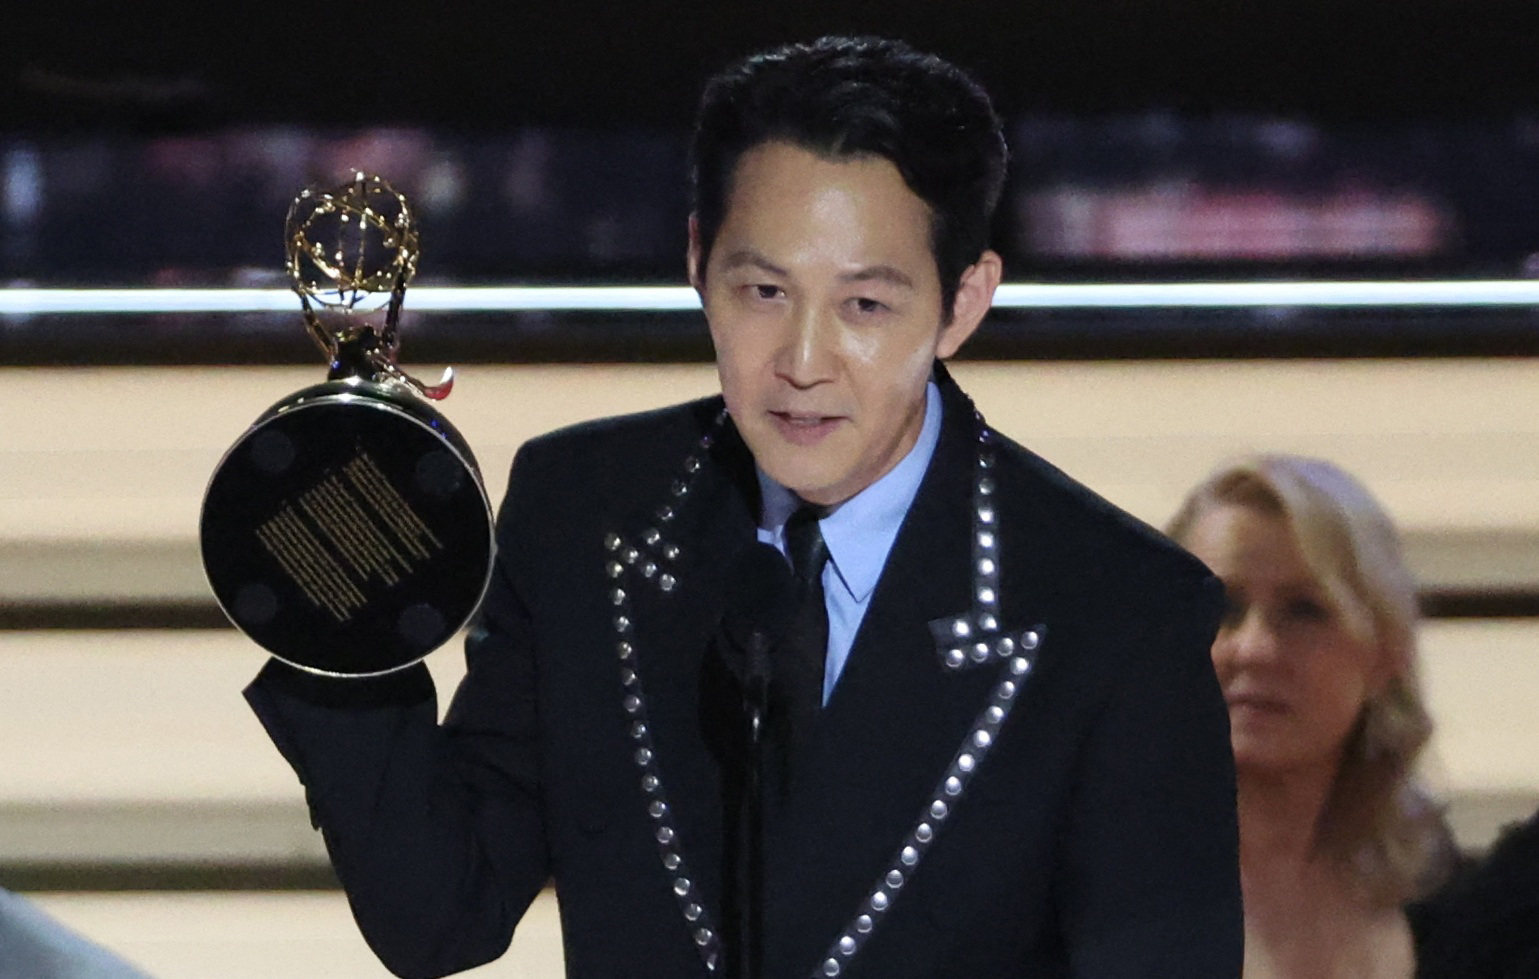 Lee Jung-jae accepts the award for outstanding lead actor in a drama series for Squid Game at the 74th Primetime Emmy Awards in Los Angeles. Photo: Reuters